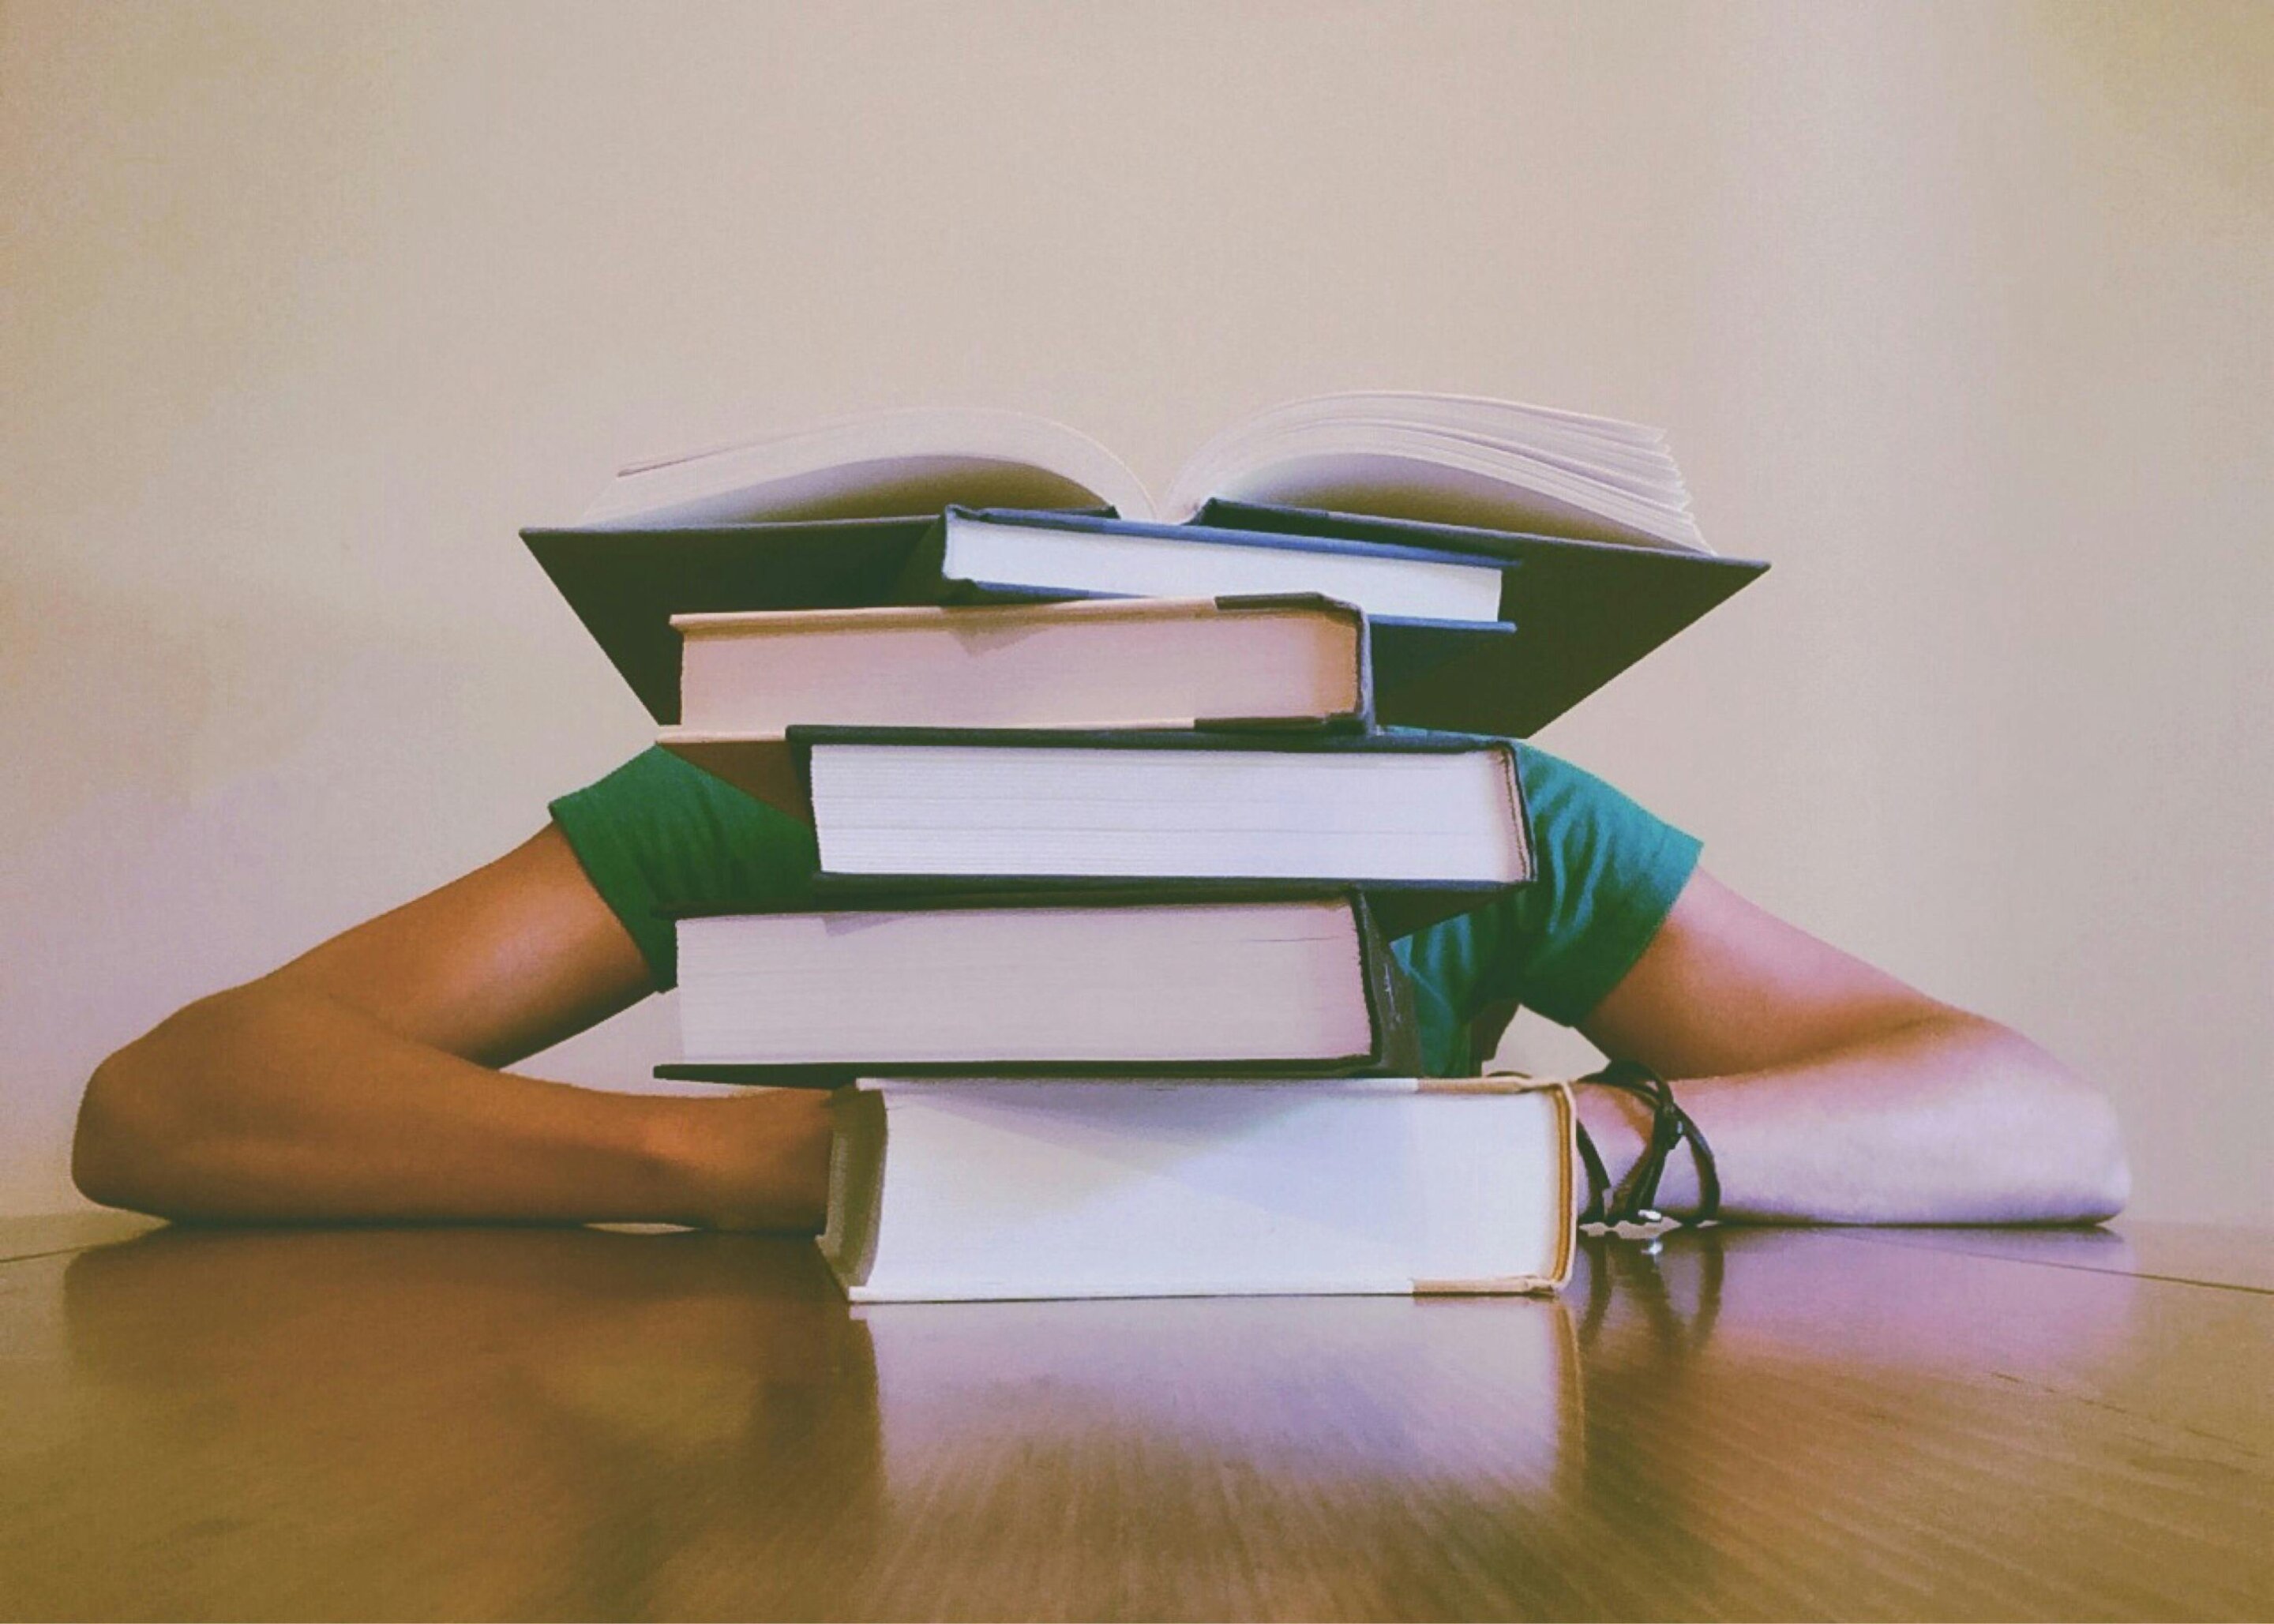 #Cramming for an exam isn’t the best way to learn—but if you have to do it, here’s how